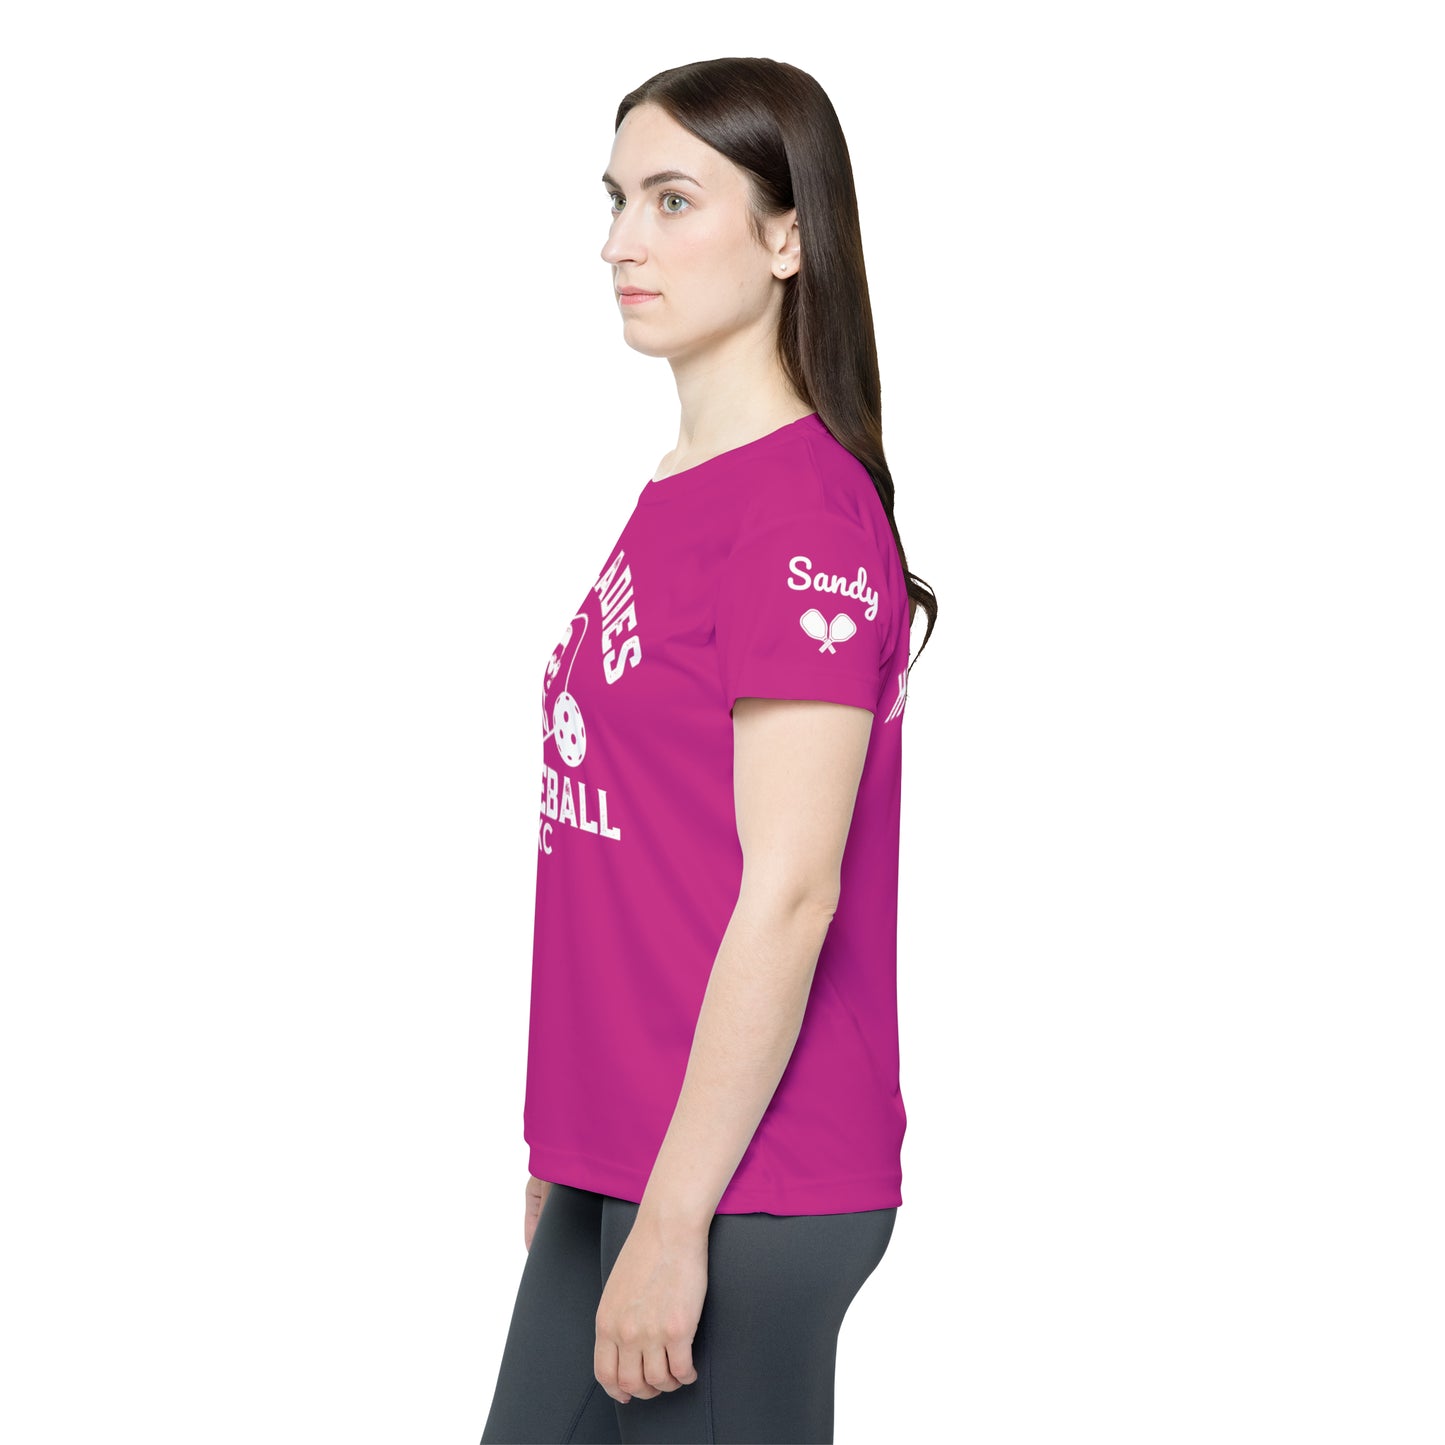 (Sandy)New Lady Face - Pink Ladies Pickleball Women's Sports Jersey - Customized